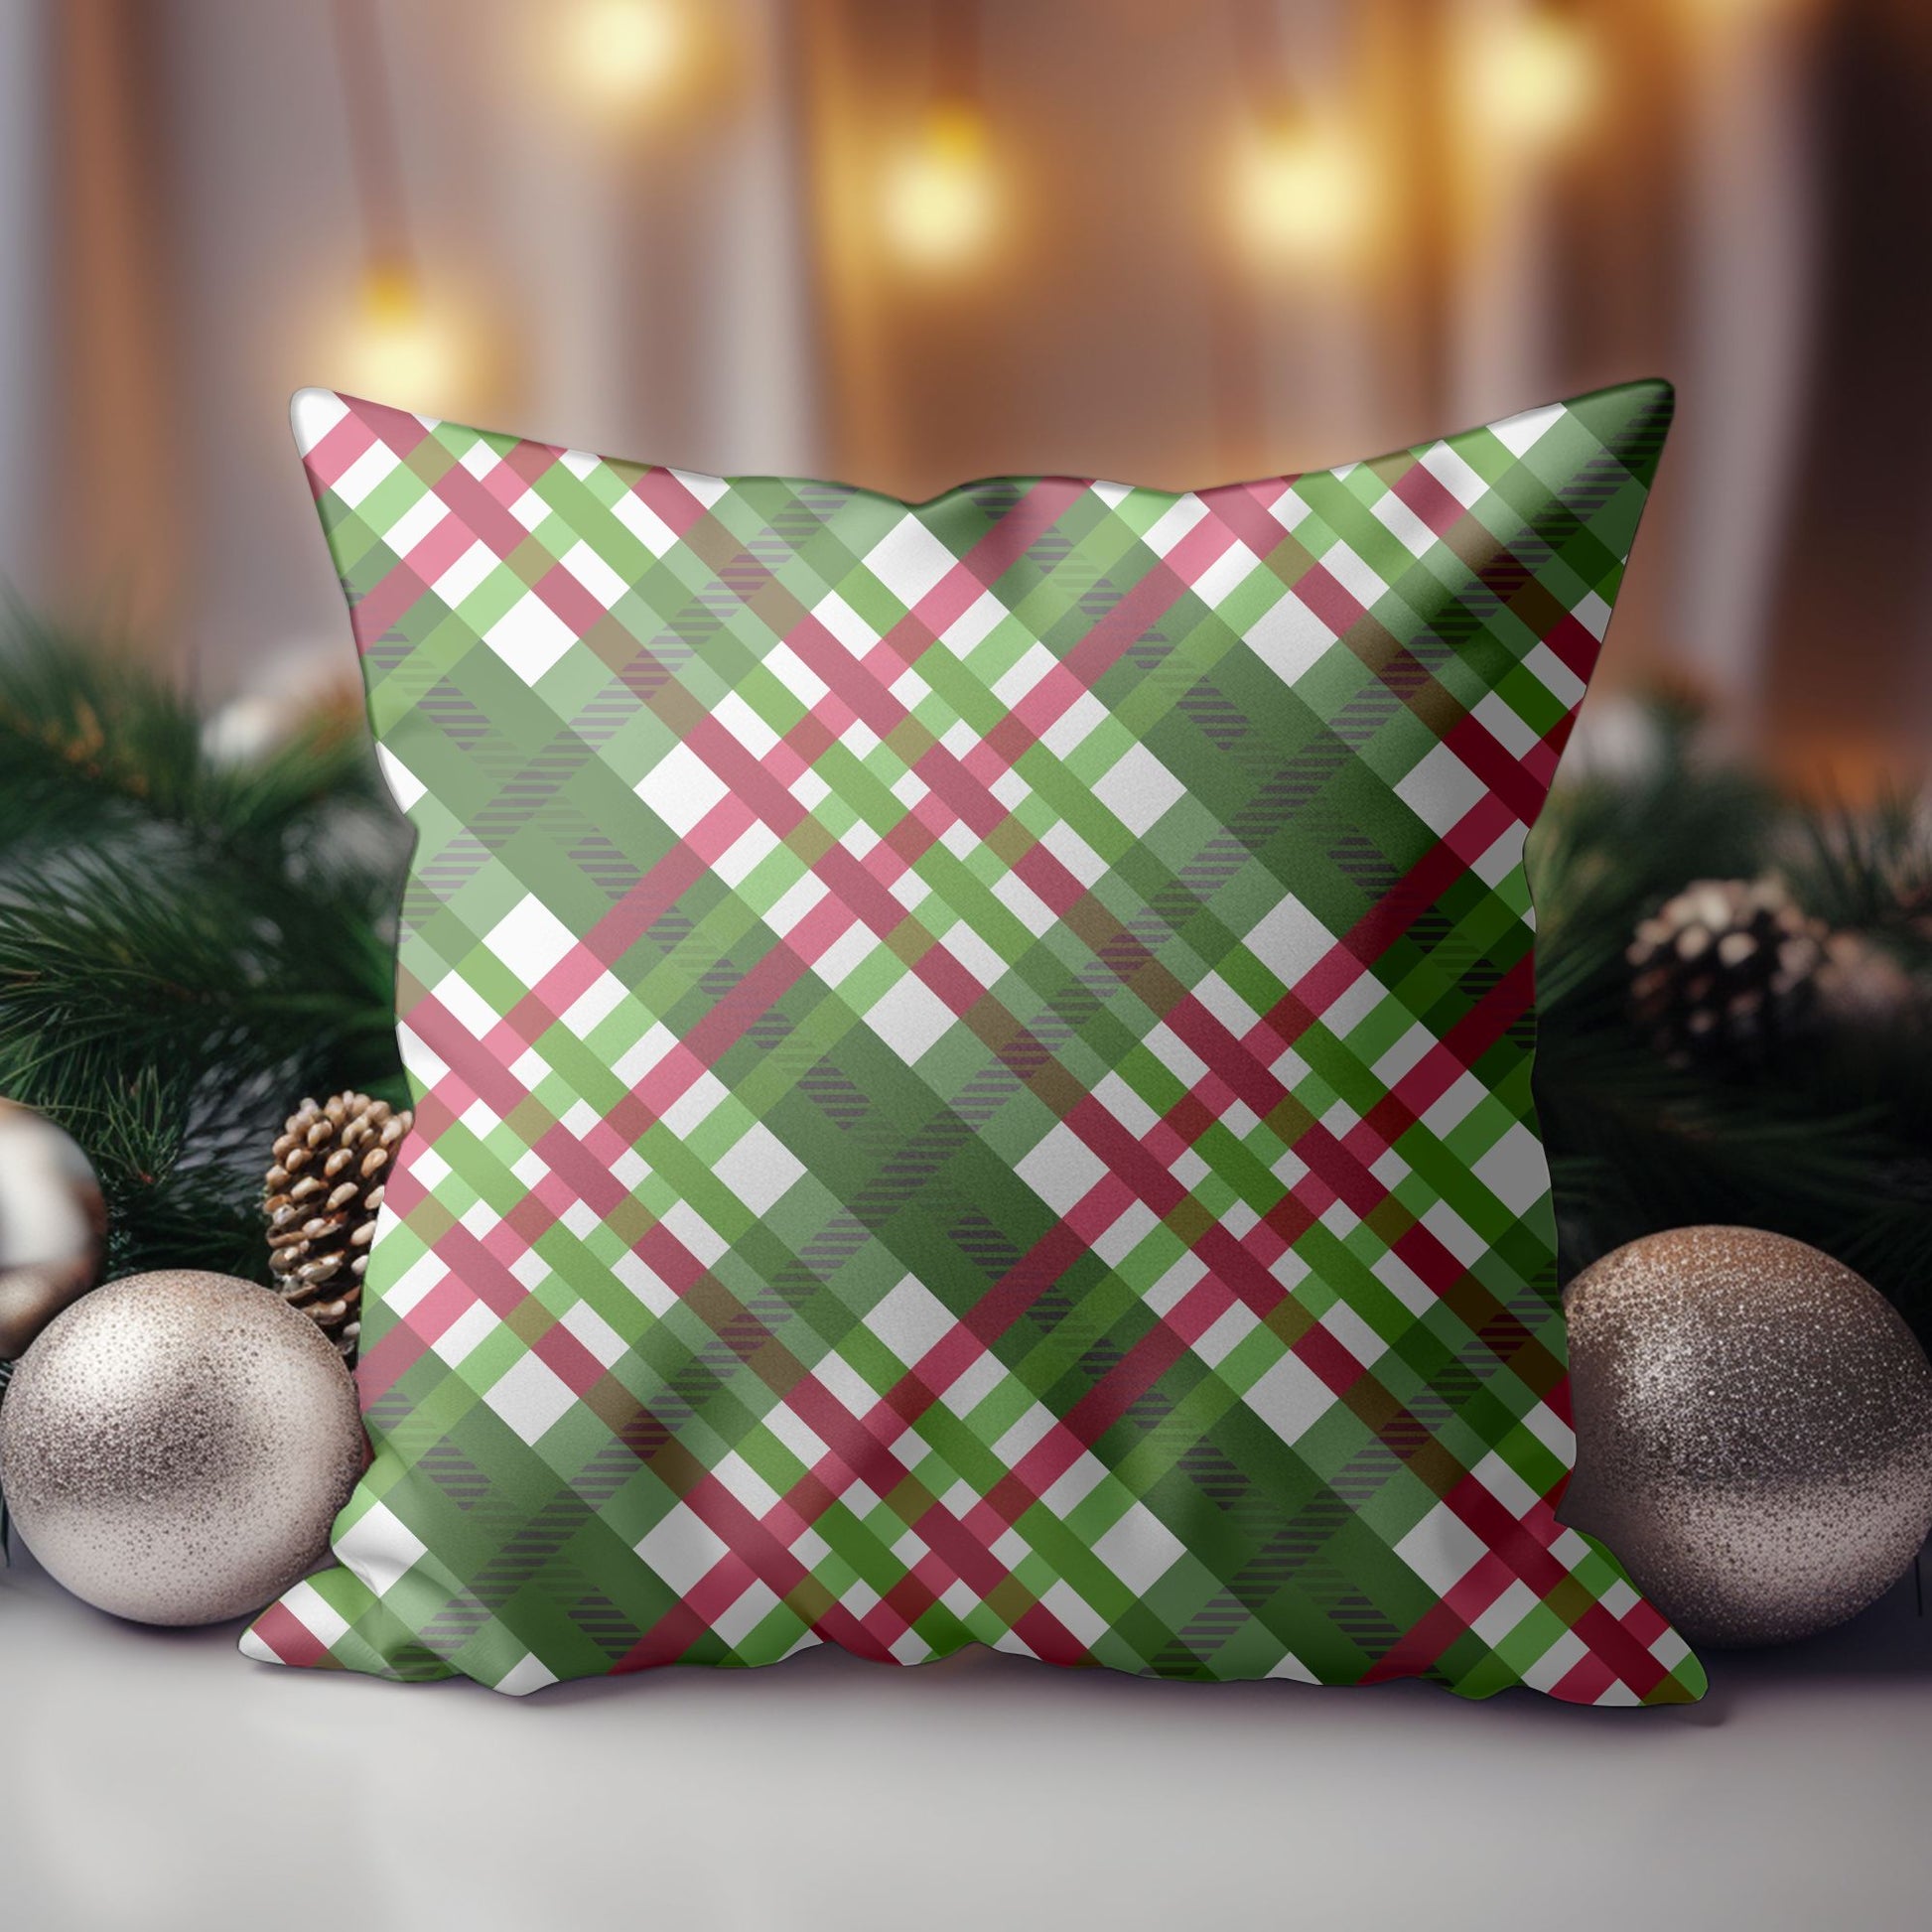 Christmas-Themed Decorative Pillow with Traditional Plaid